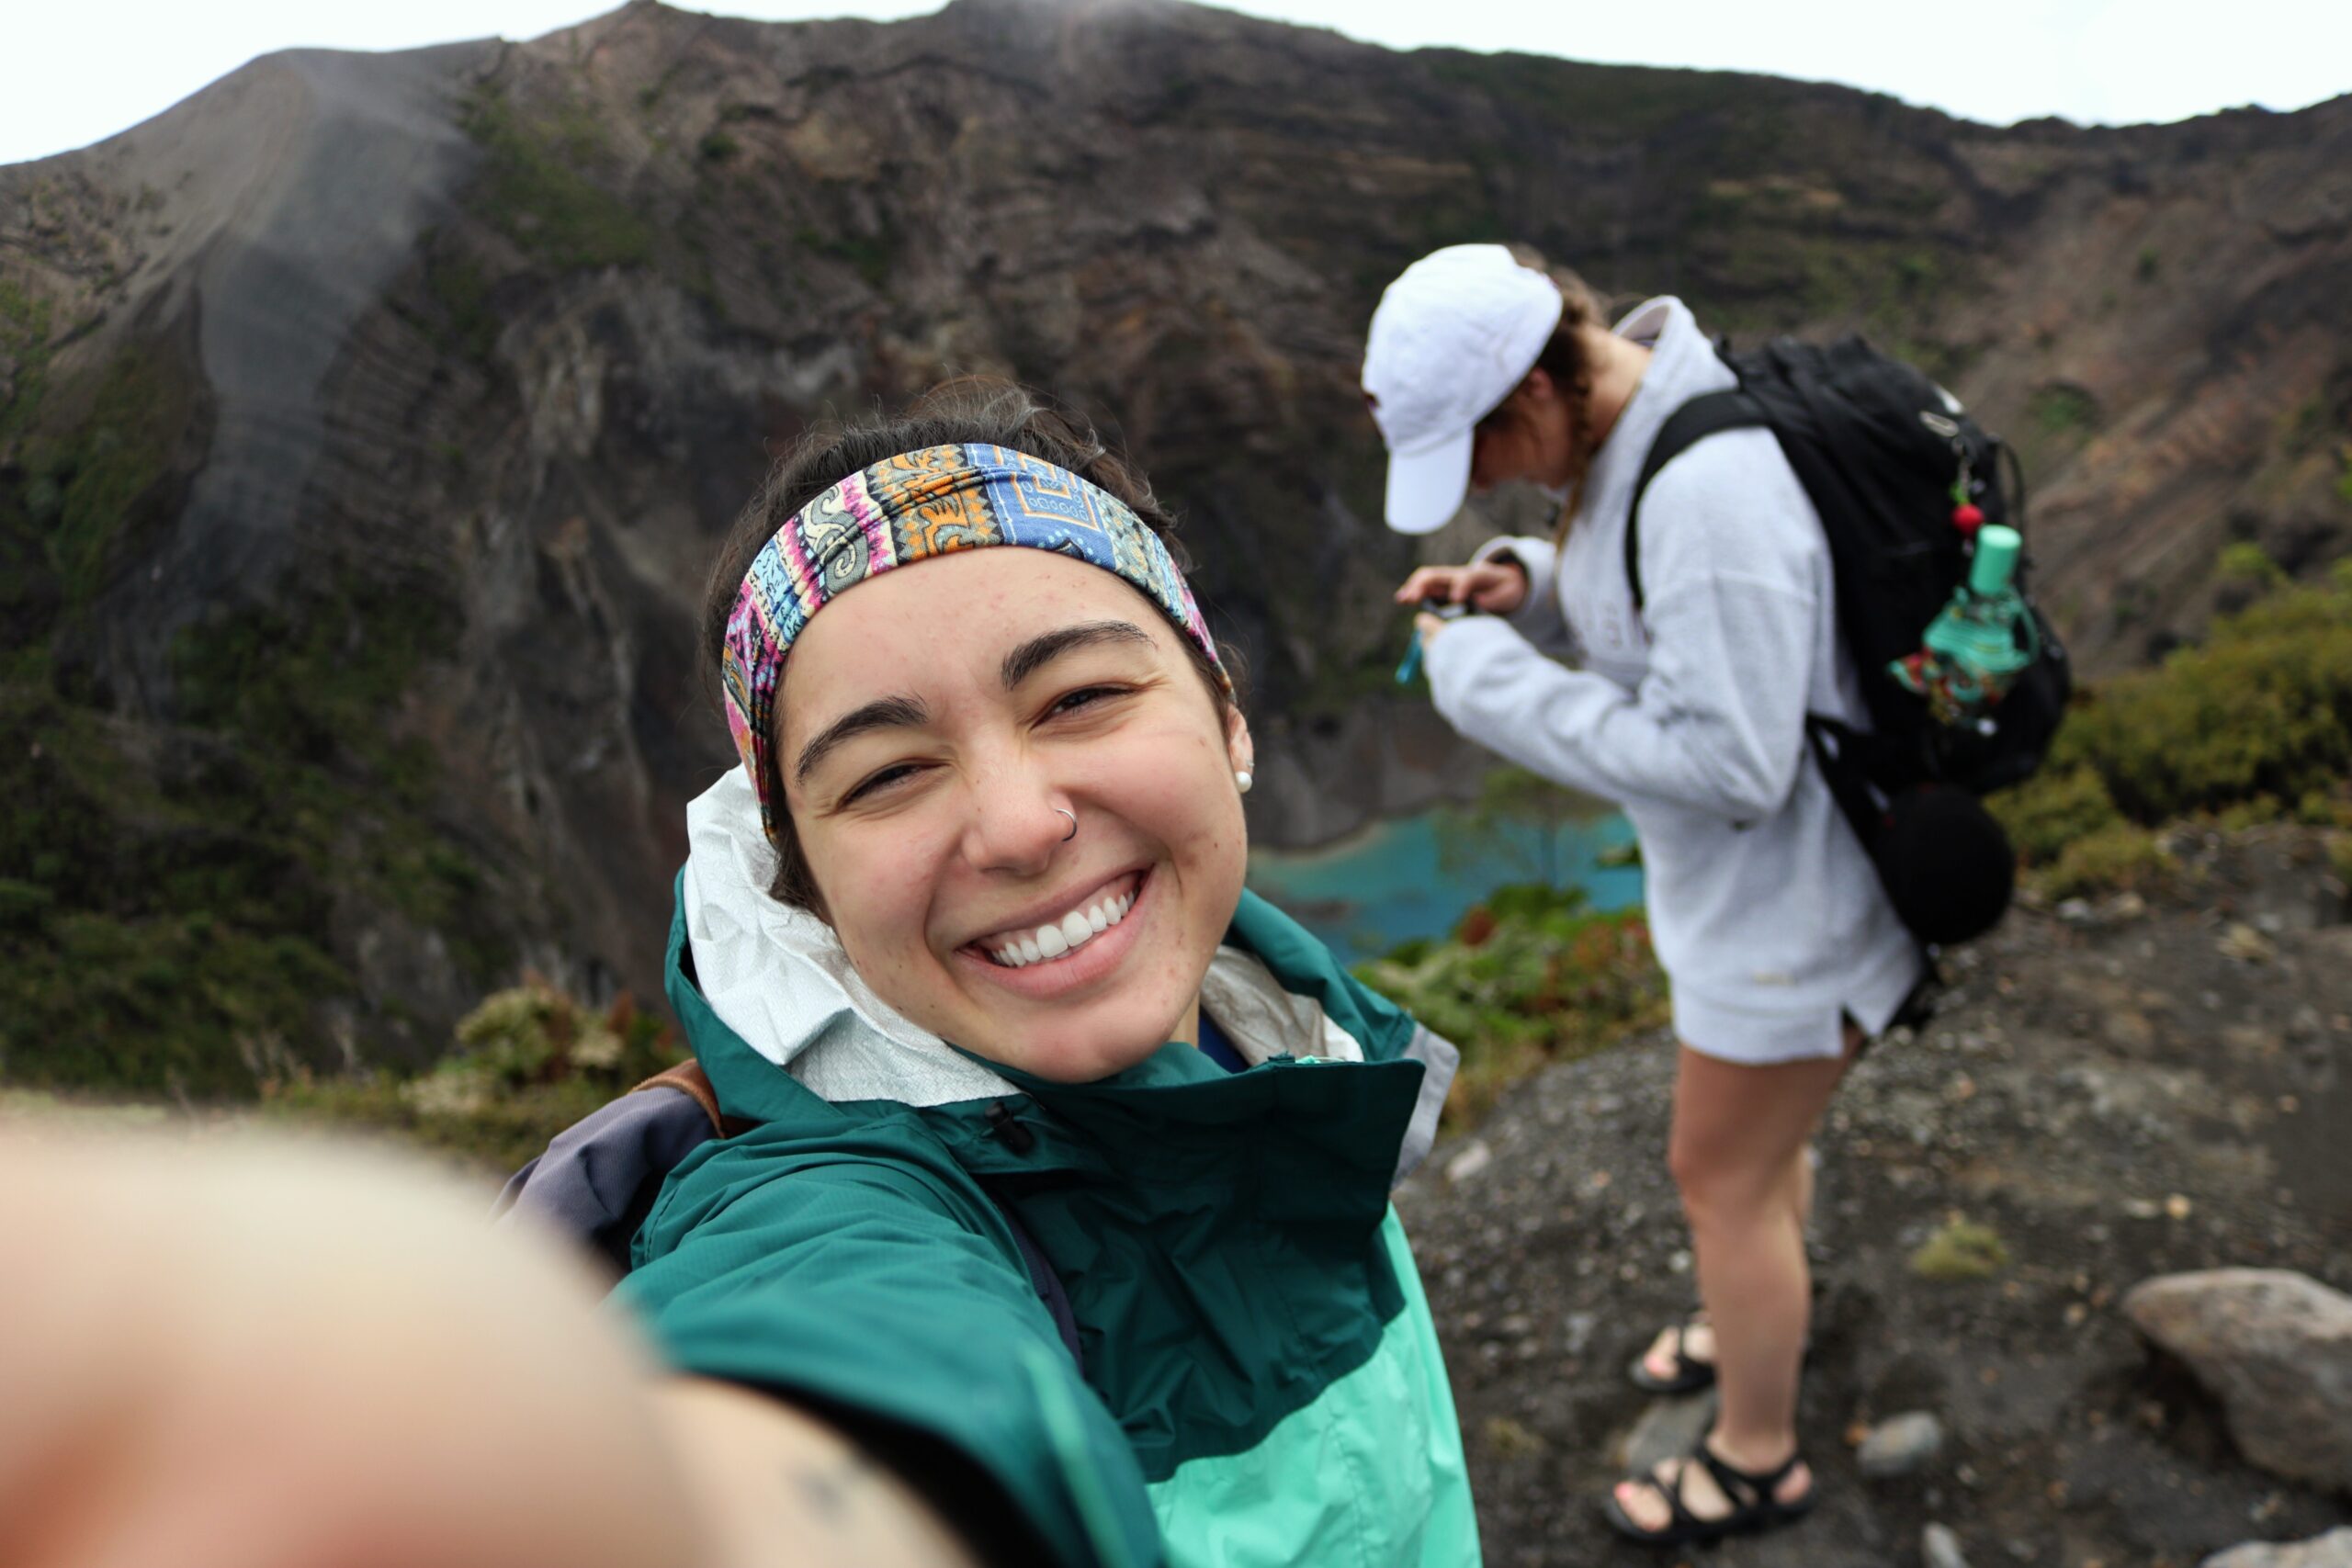 Student takes selfie in the mountains during summer study abroad trip.